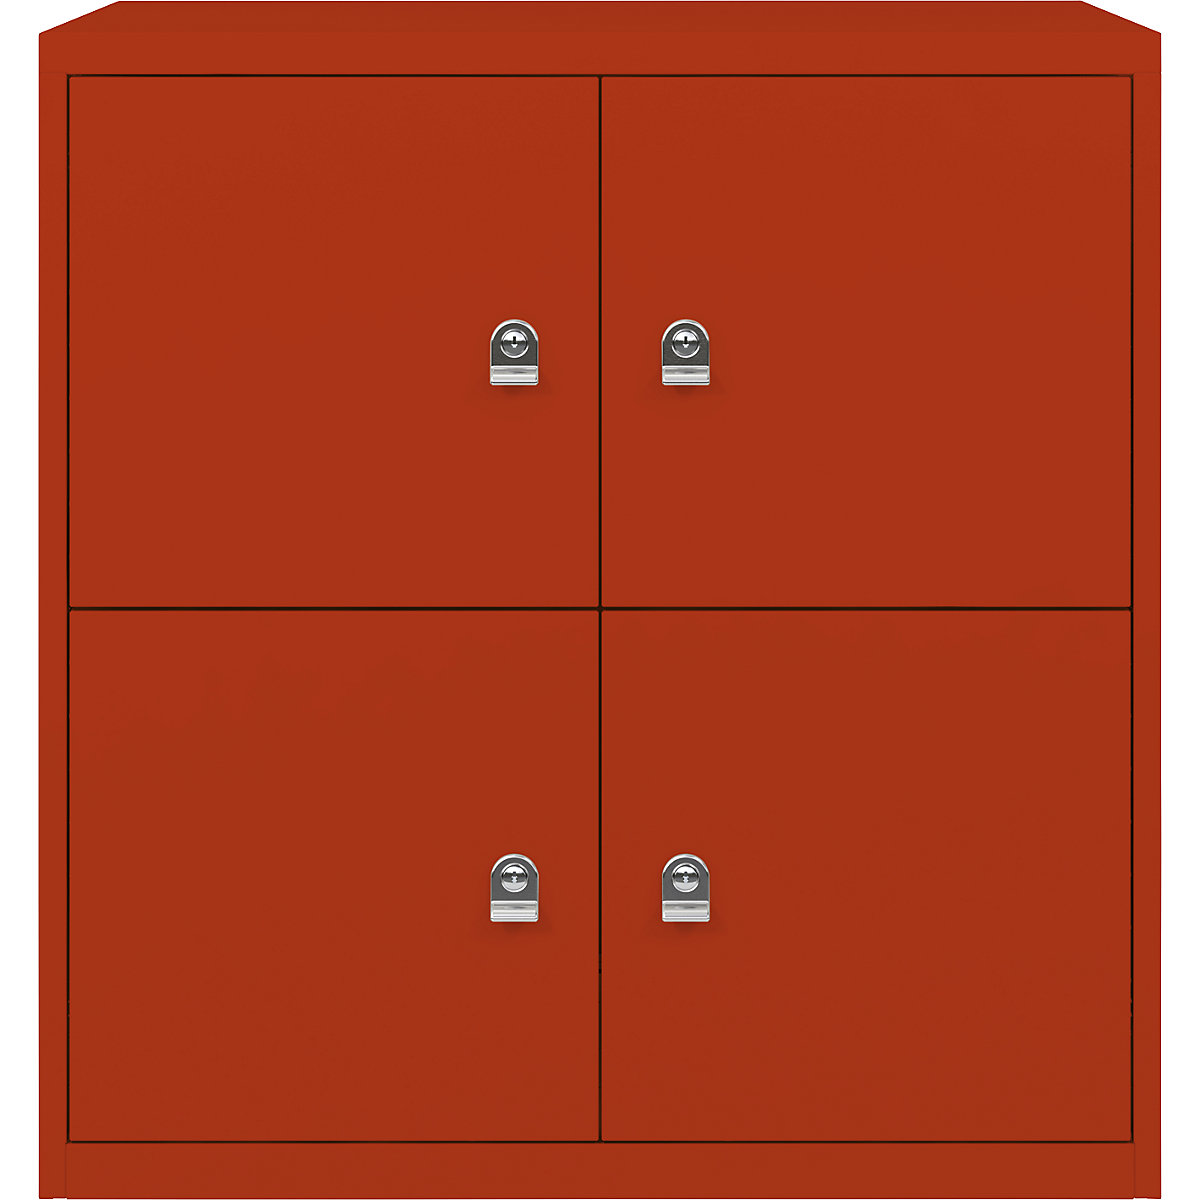 BISLEY – LateralFile™ lodge, with 4 lockable compartments, height 375 mm each, sevilla